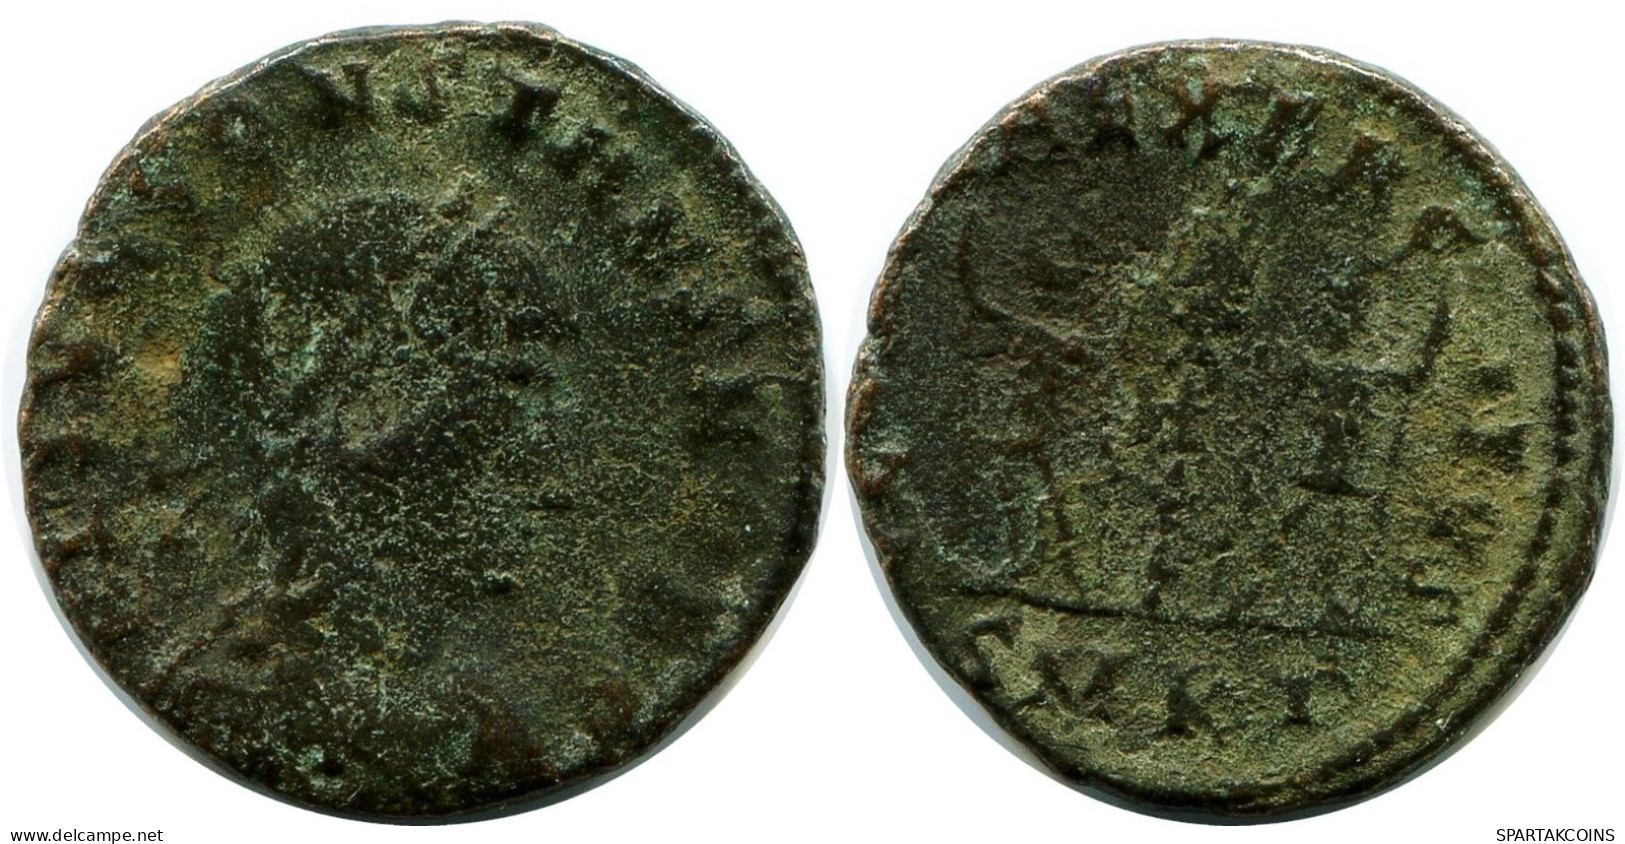 CONSTANS MINTED IN CYZICUS FOUND IN IHNASYAH HOARD EGYPT #ANC11608.14.E.A - El Imperio Christiano (307 / 363)